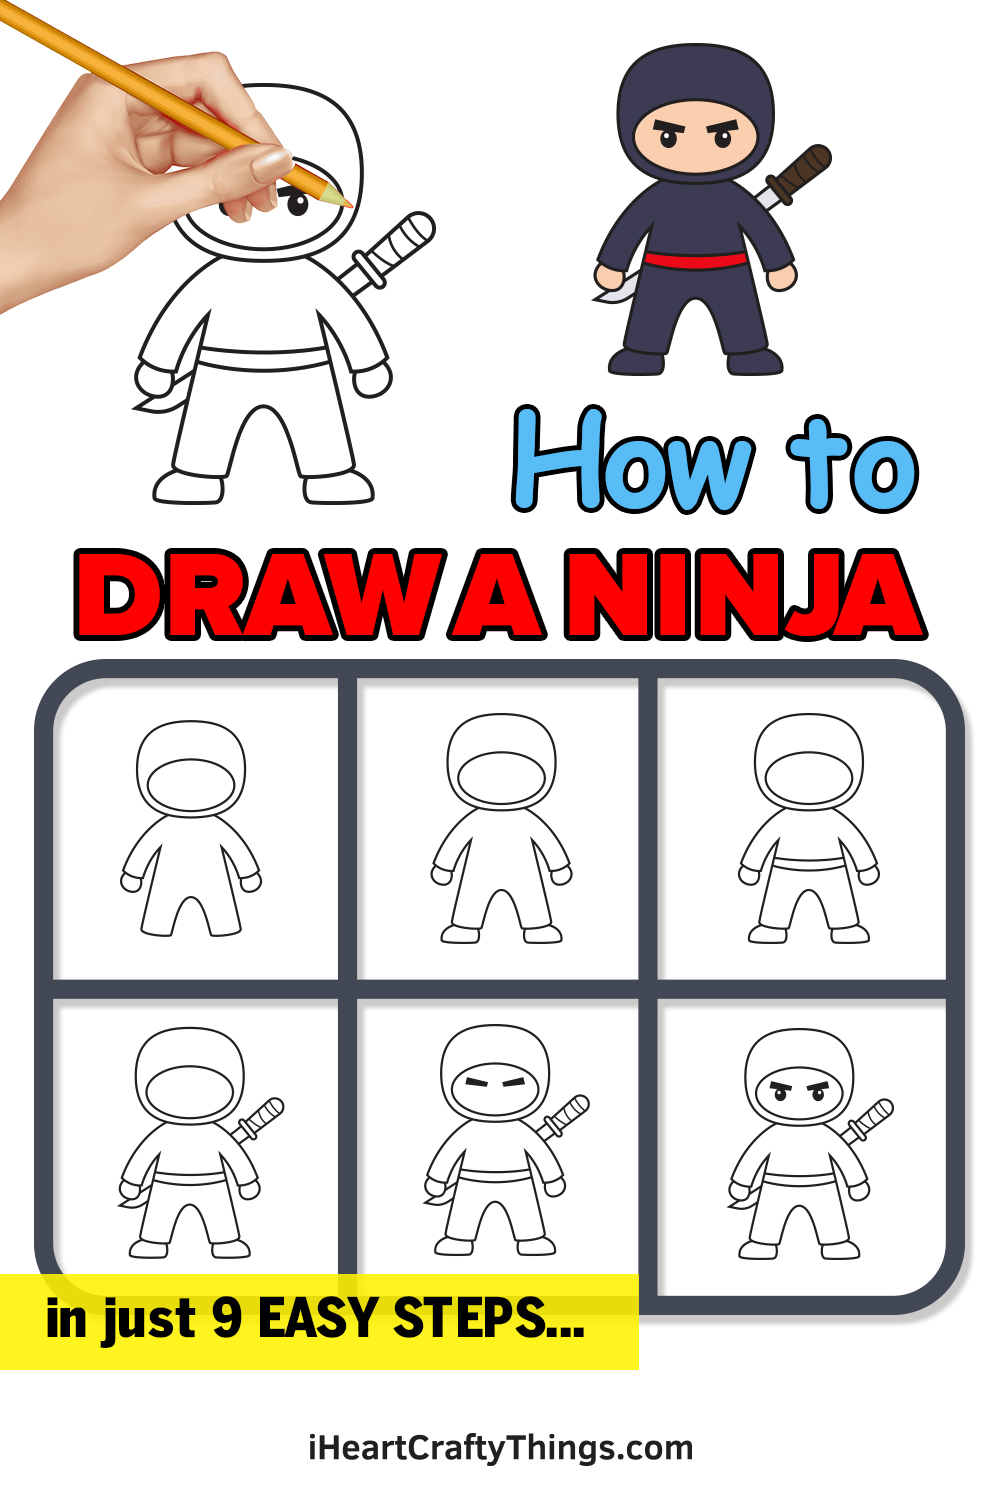 how to draw a ninja in 9 easy steps